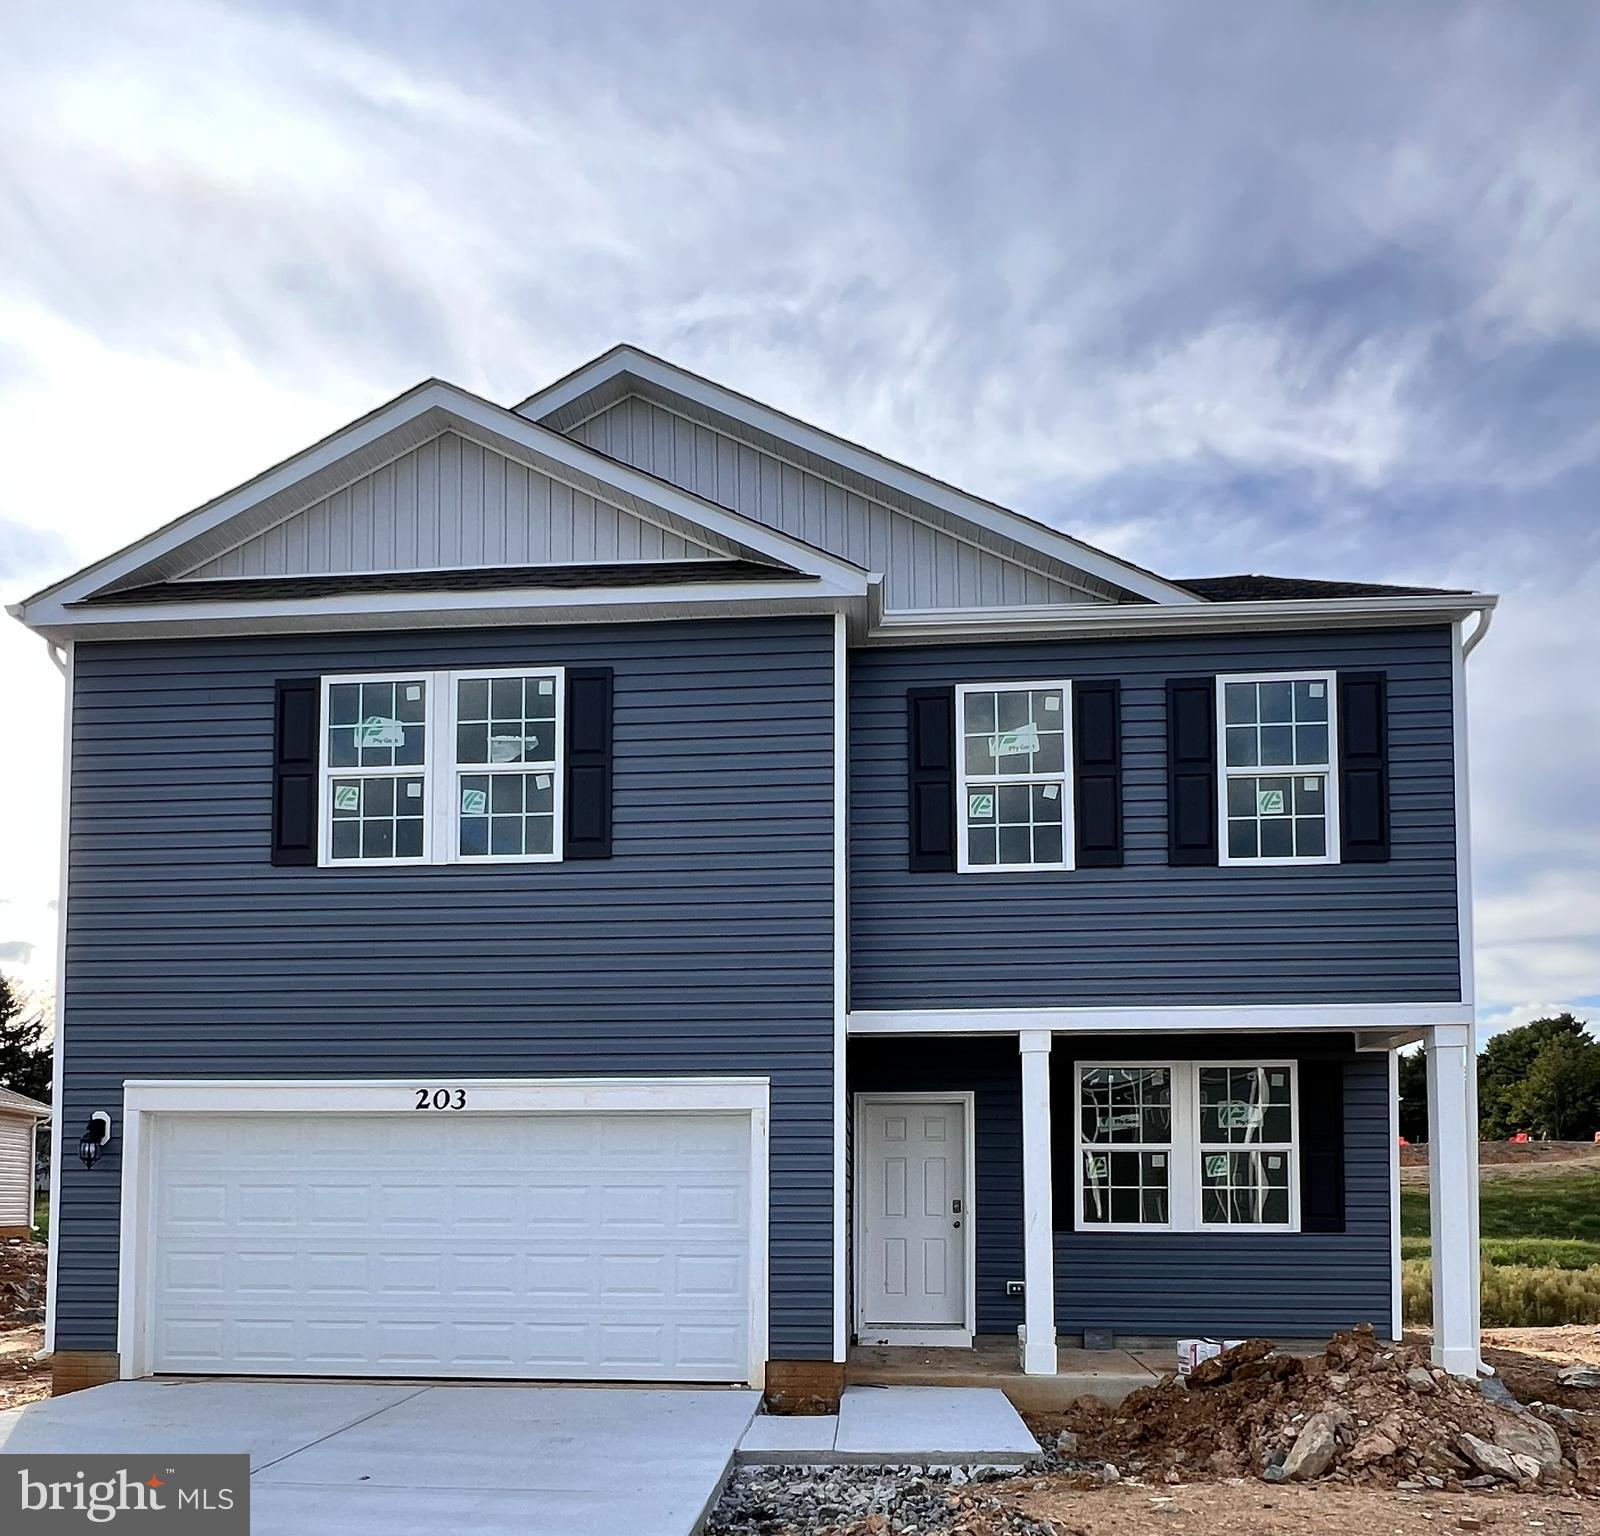 D R Horton's newest single family Express Homes community in Charles Town. One and two story homes a